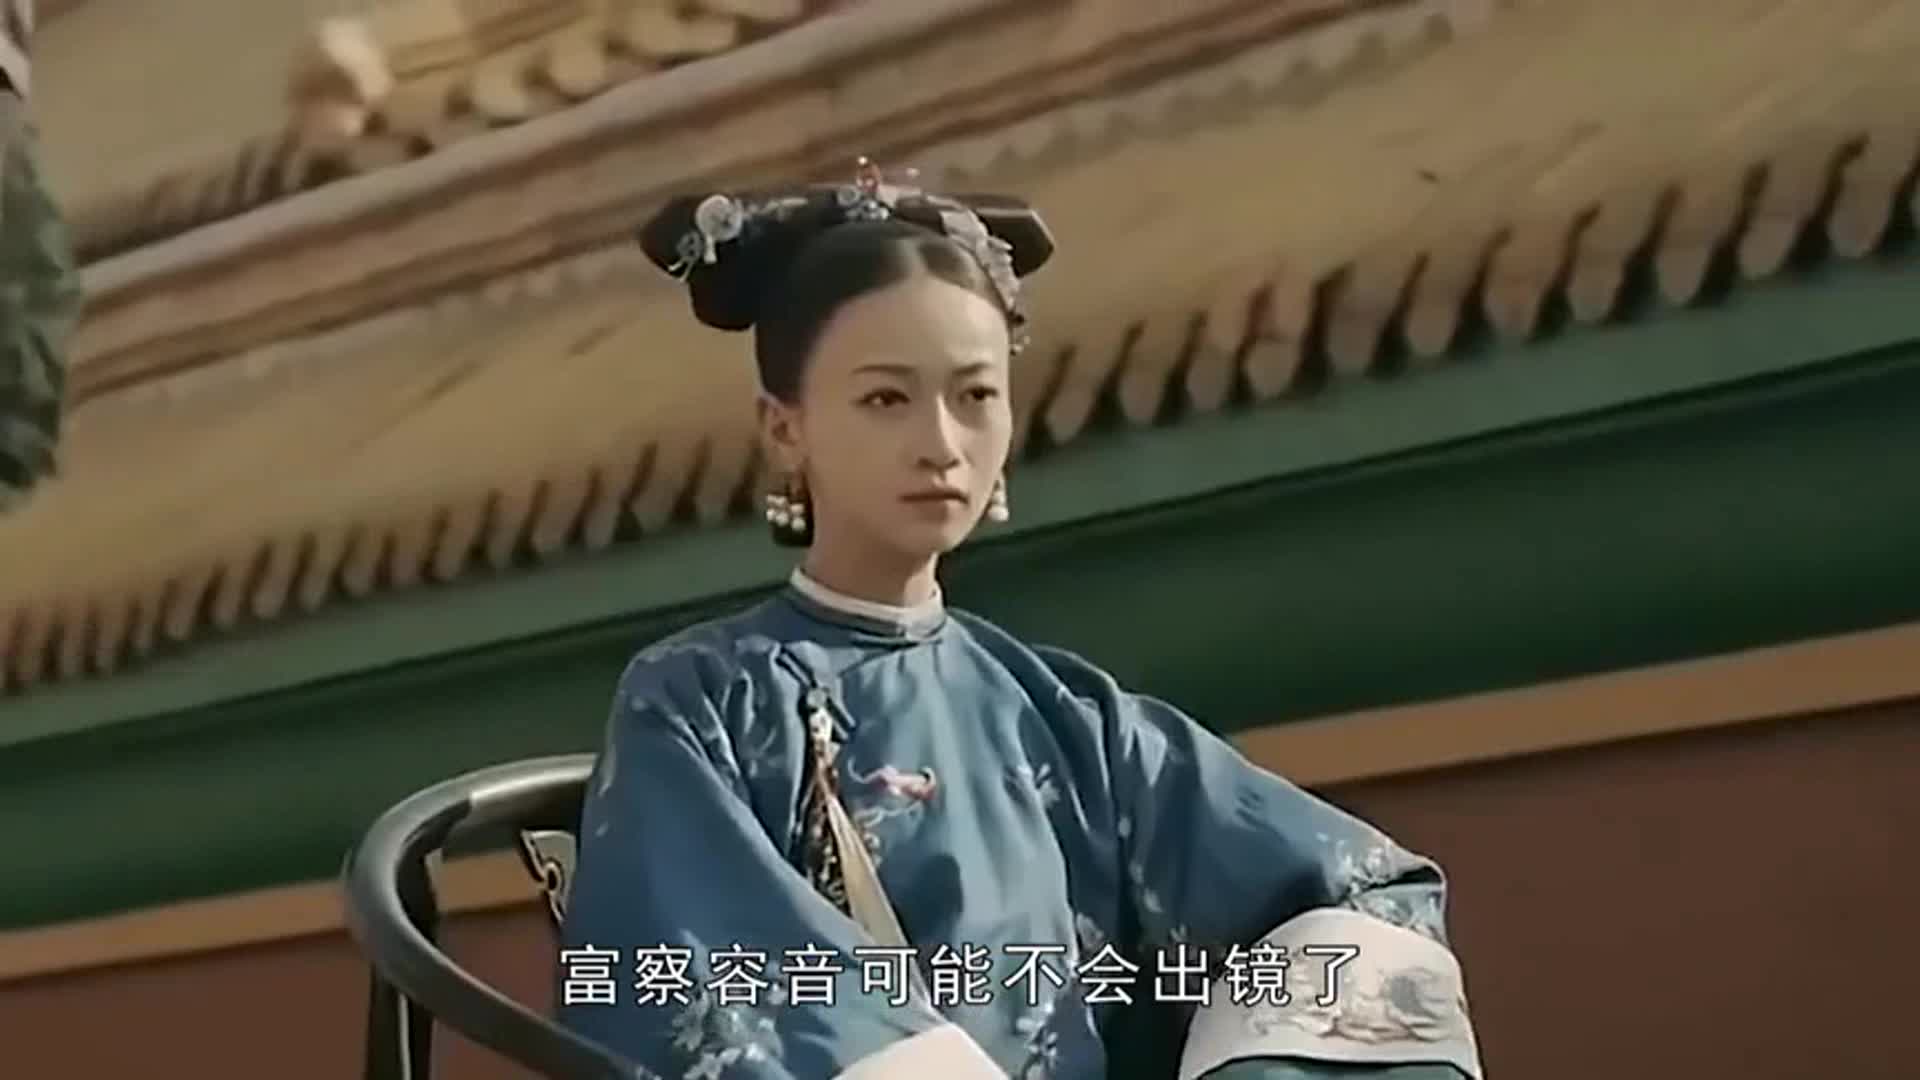 Wu Jinyan was too thin for Tucao, and the hero of 